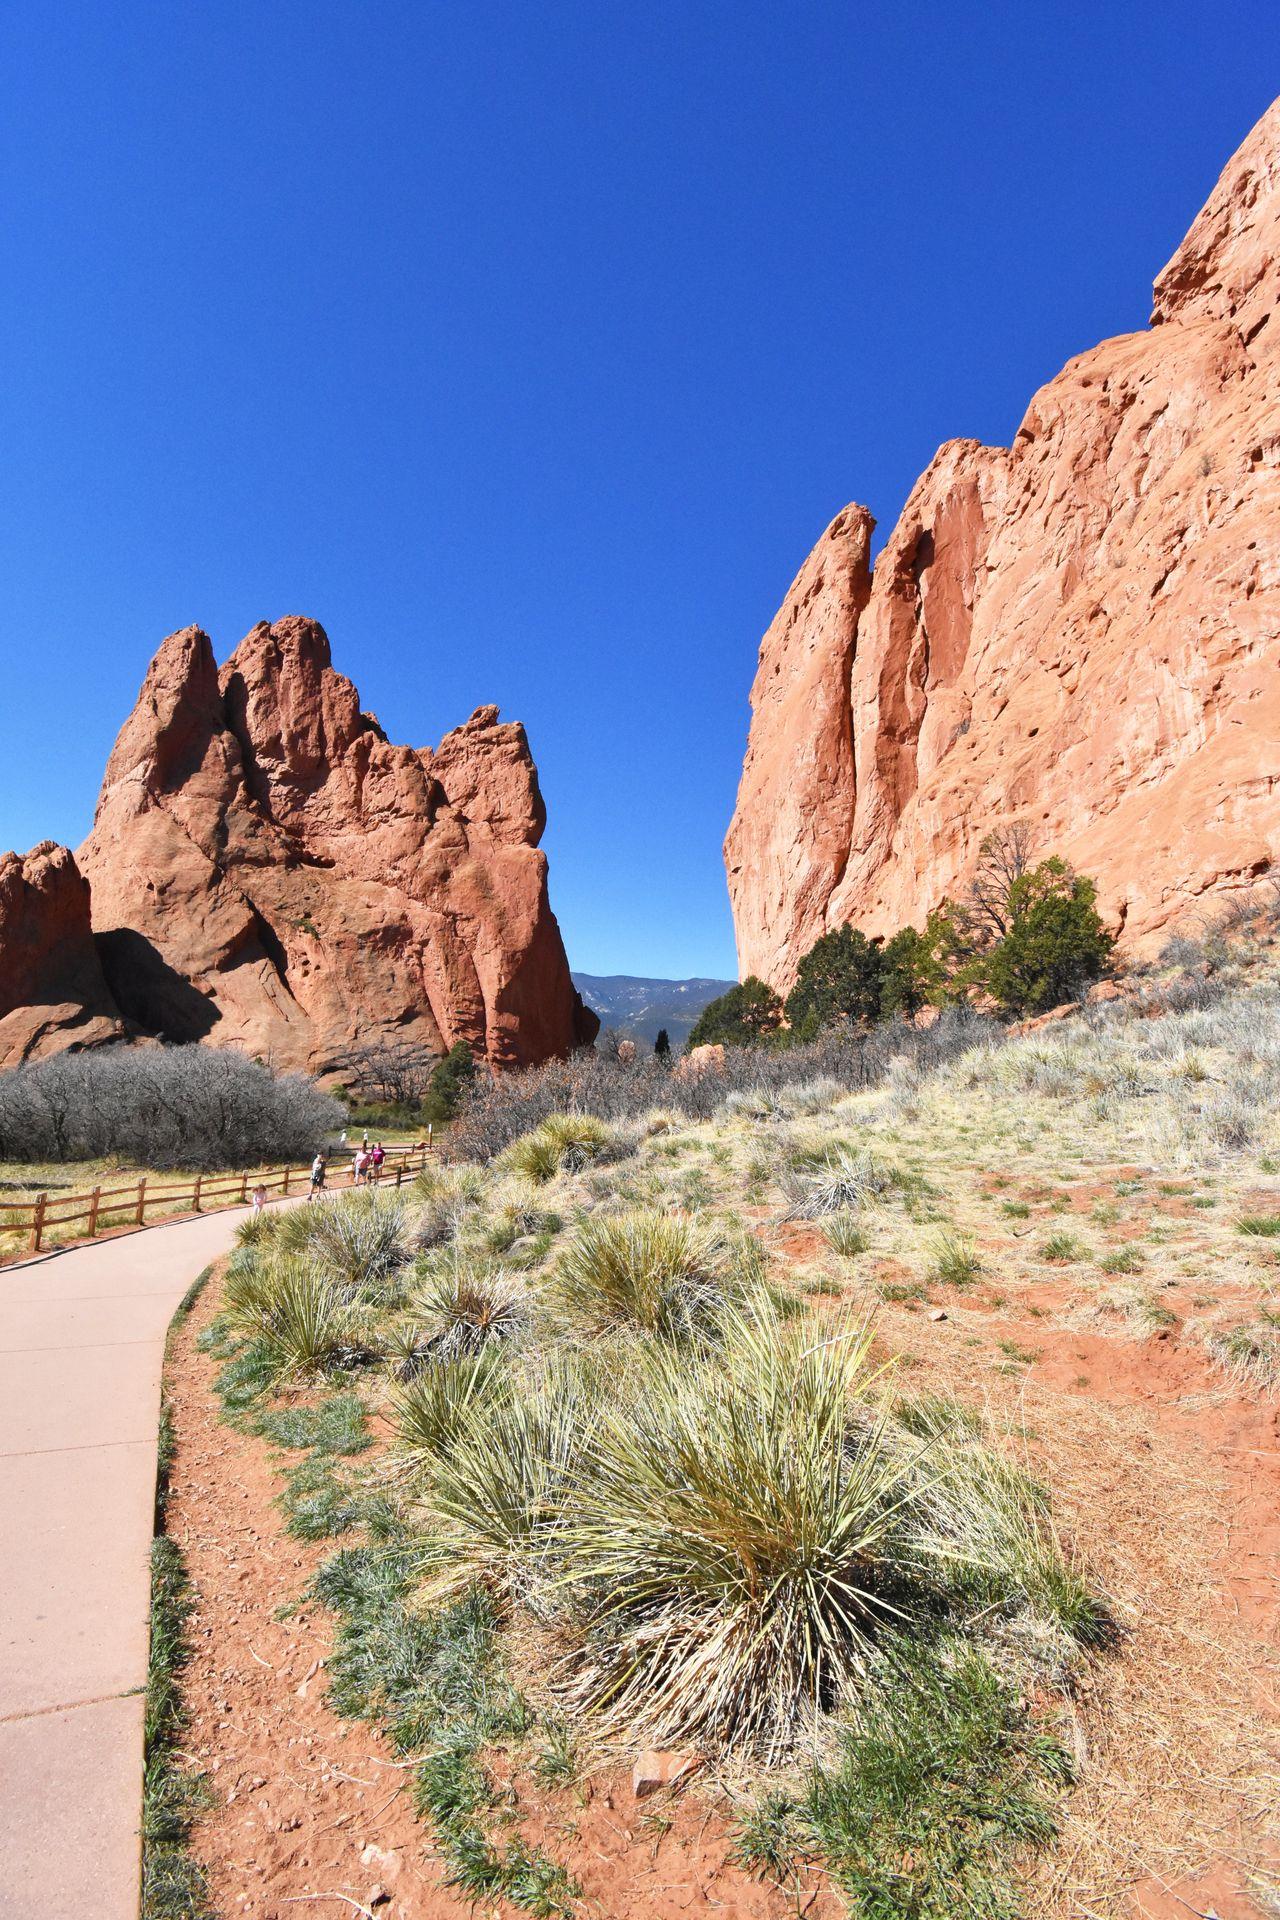 Some large, orange rocks with a paved path going between them.